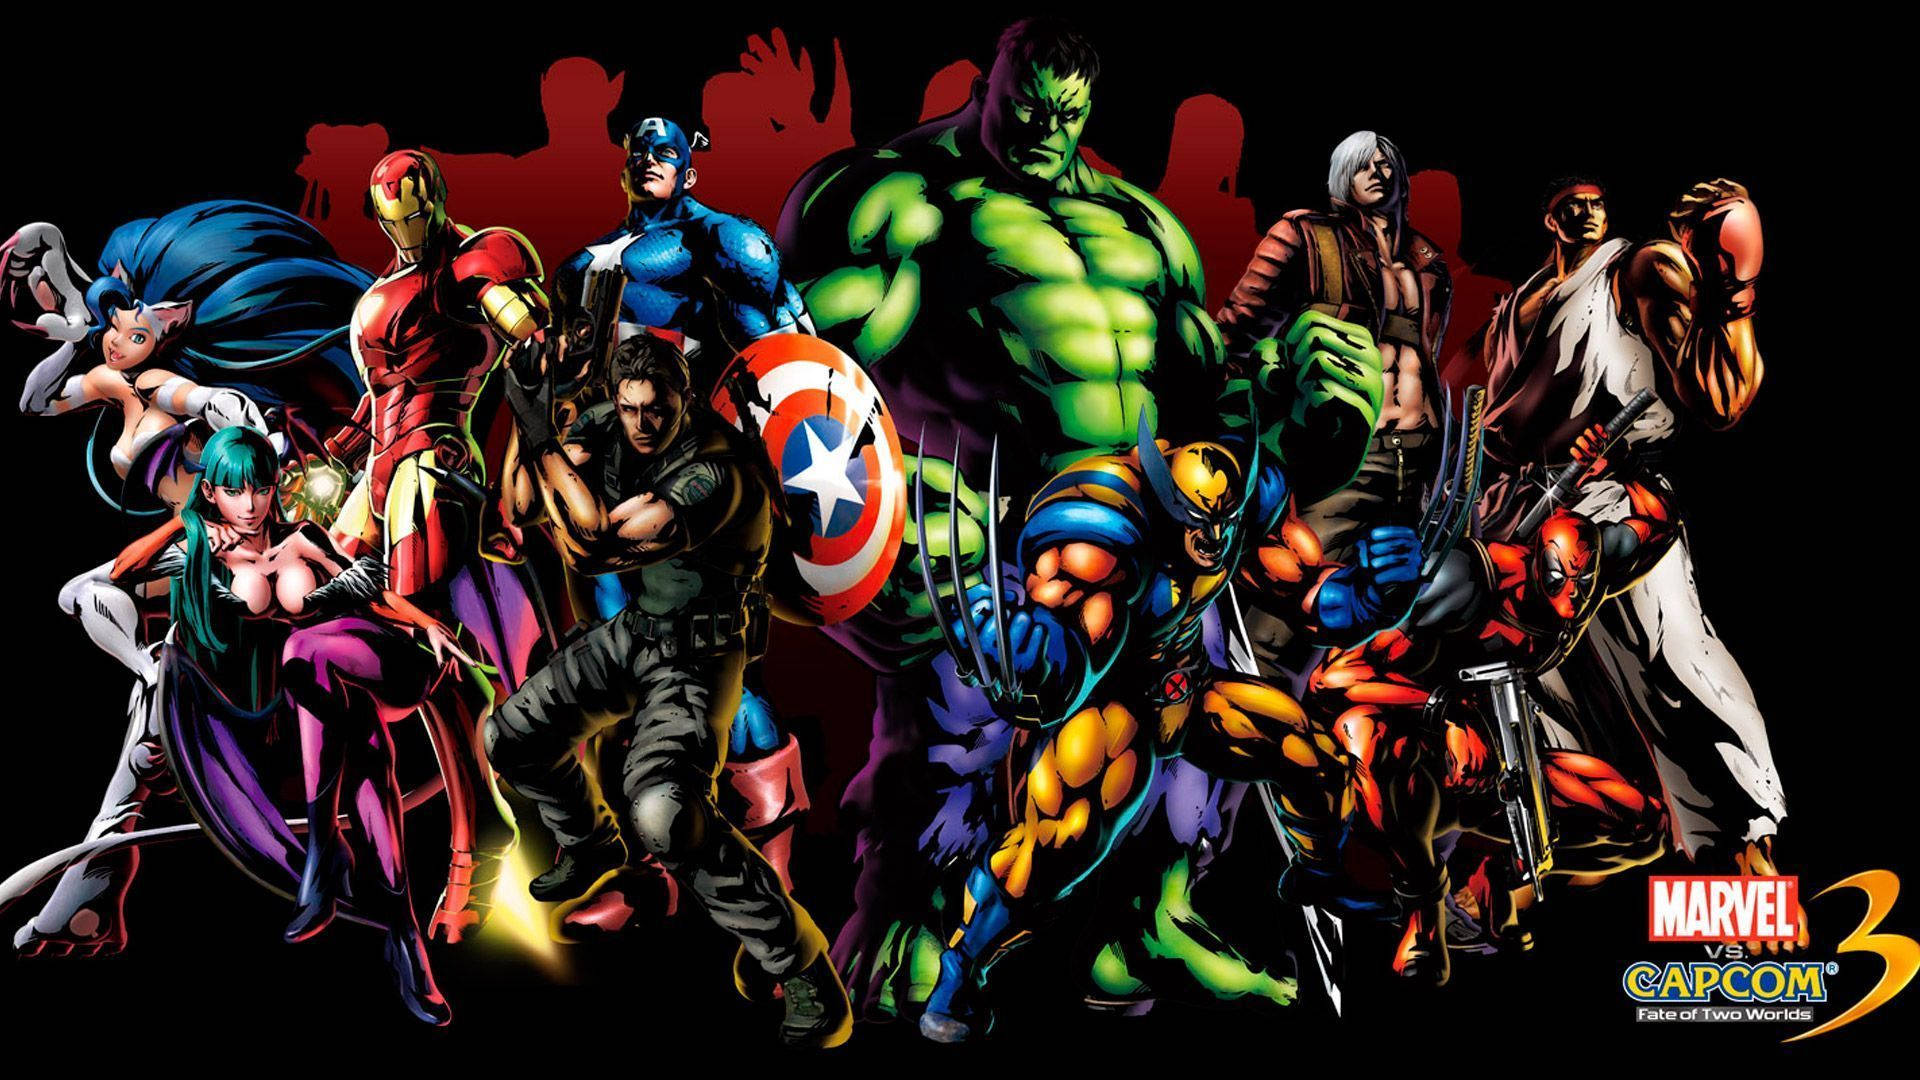 Re-imagine your gaming experience, now with Marvel and Xbox. Wallpaper